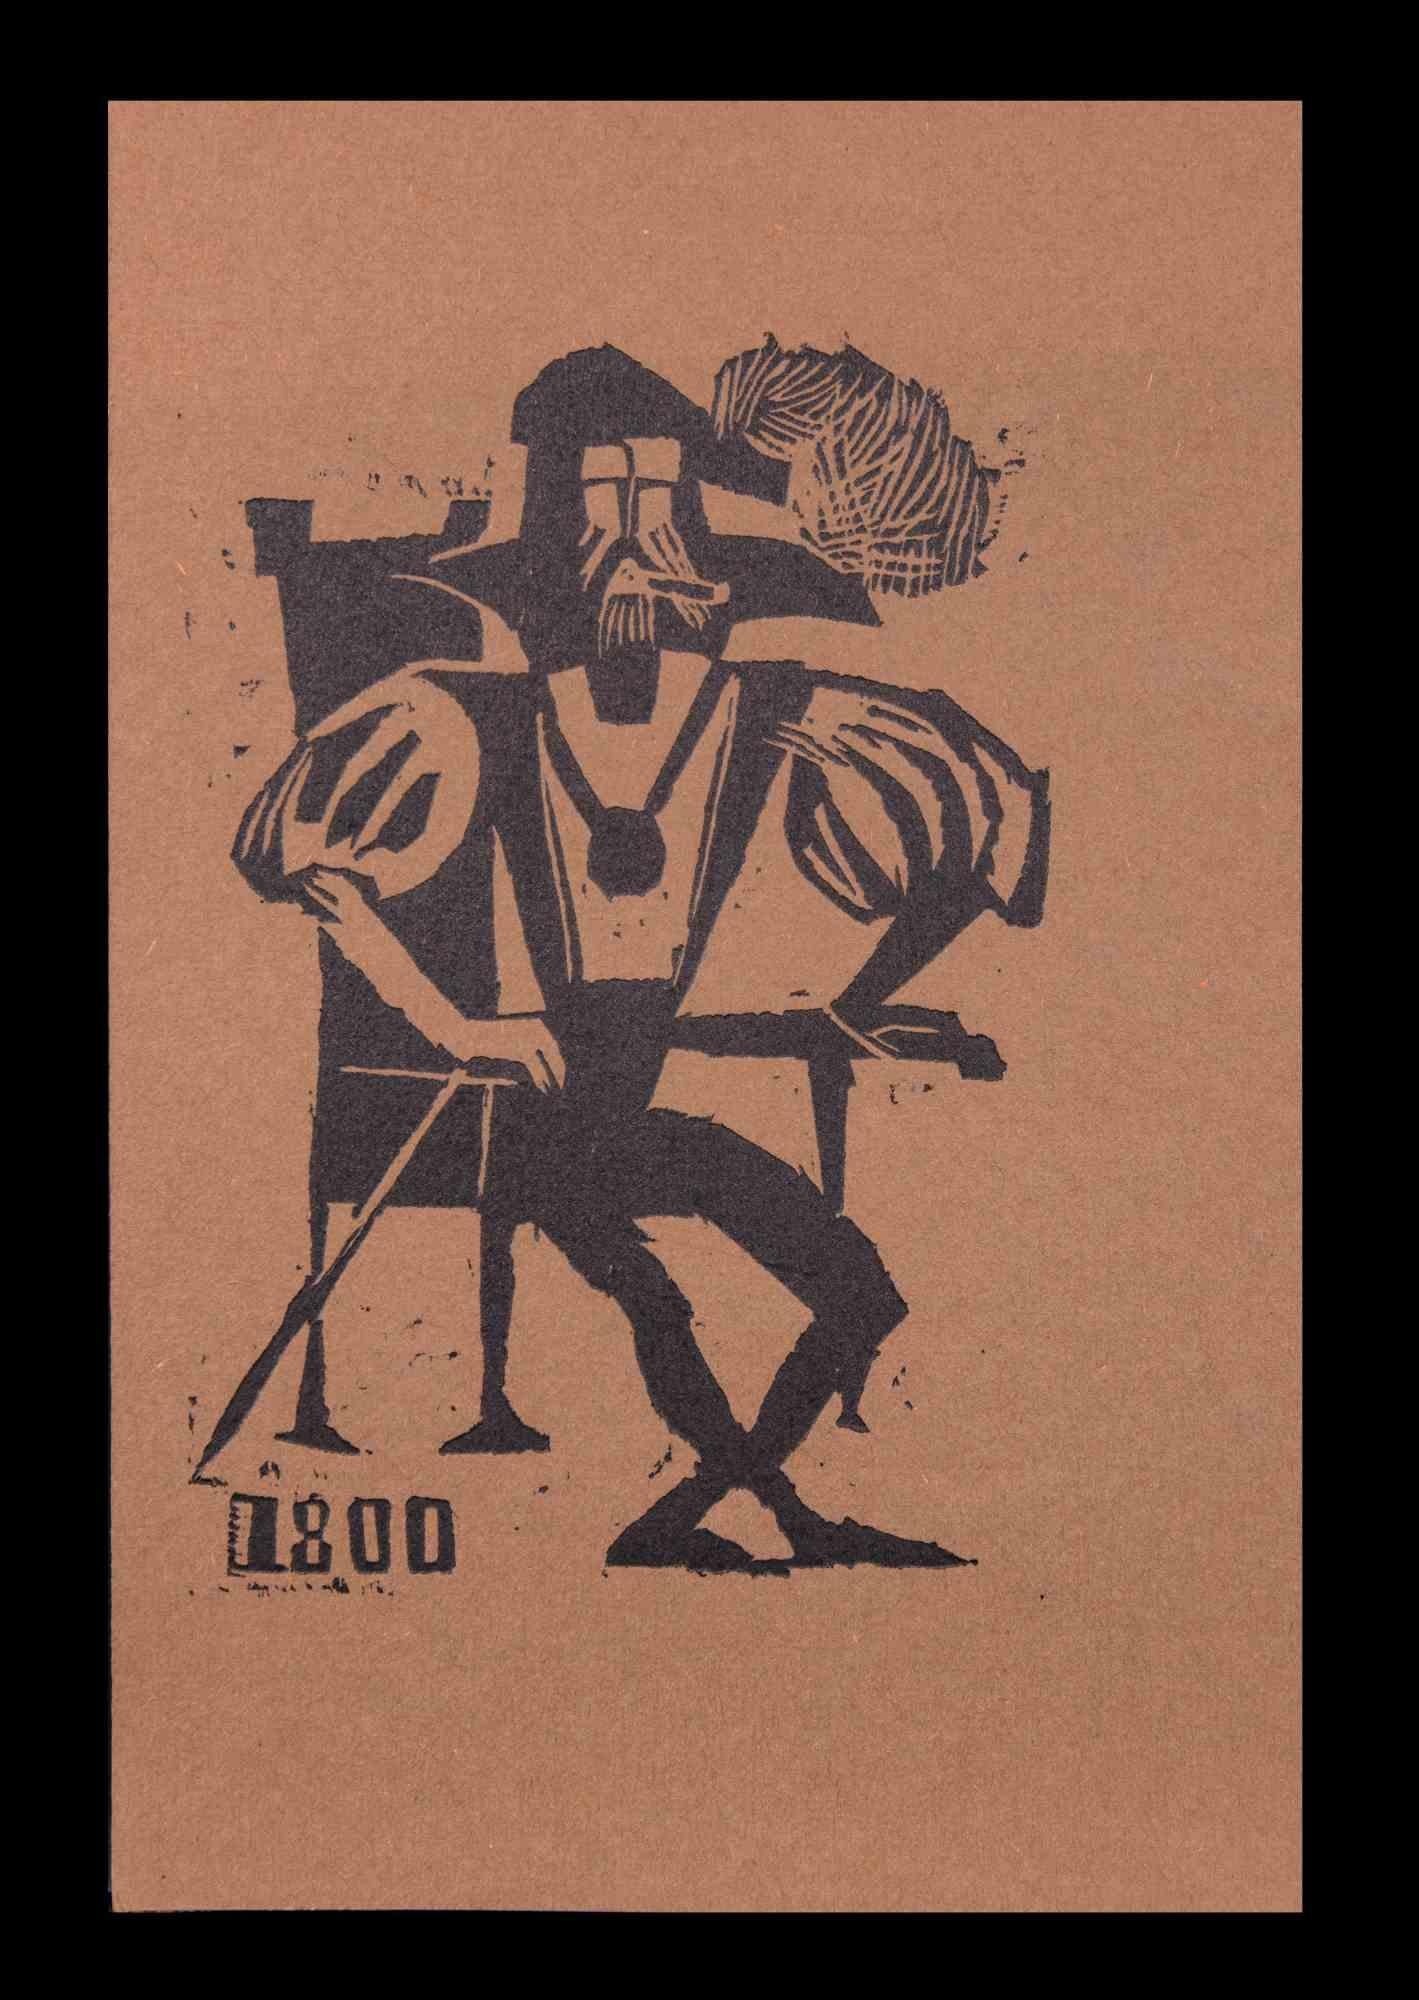 Charles Sterns Figurative Print - Smoking Baron on the Throne - Woodcut print by C. Sterns - Early 20th Century